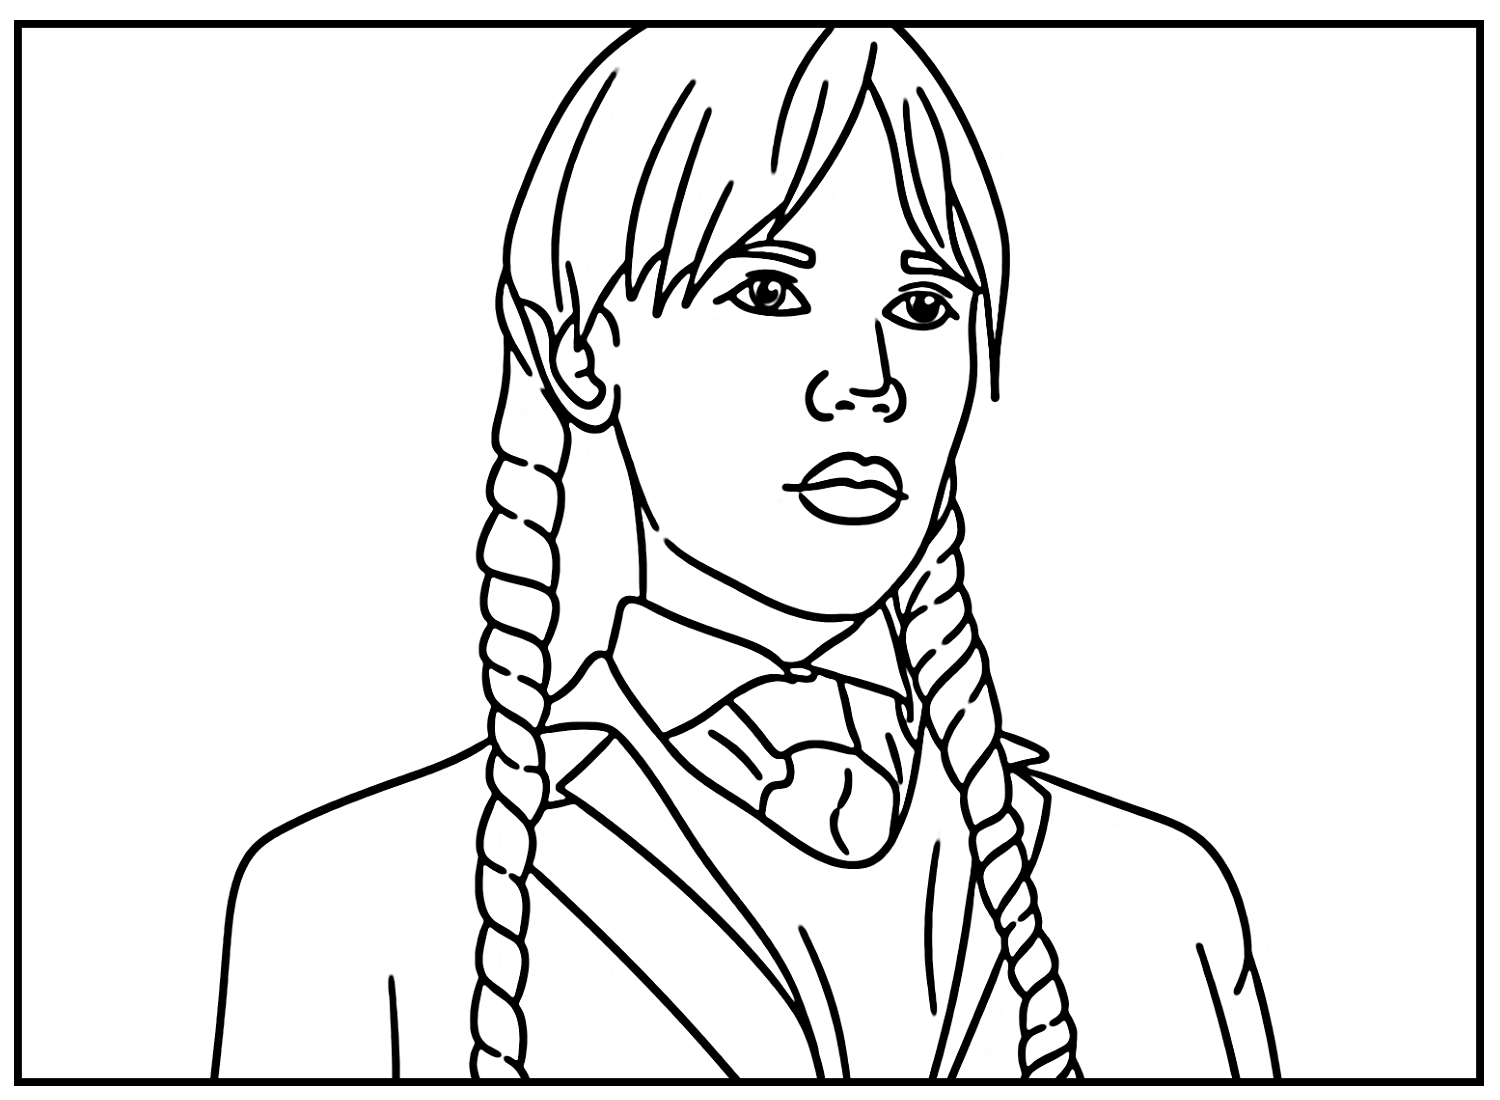 Wednesday Addams Printable Coloring Pages